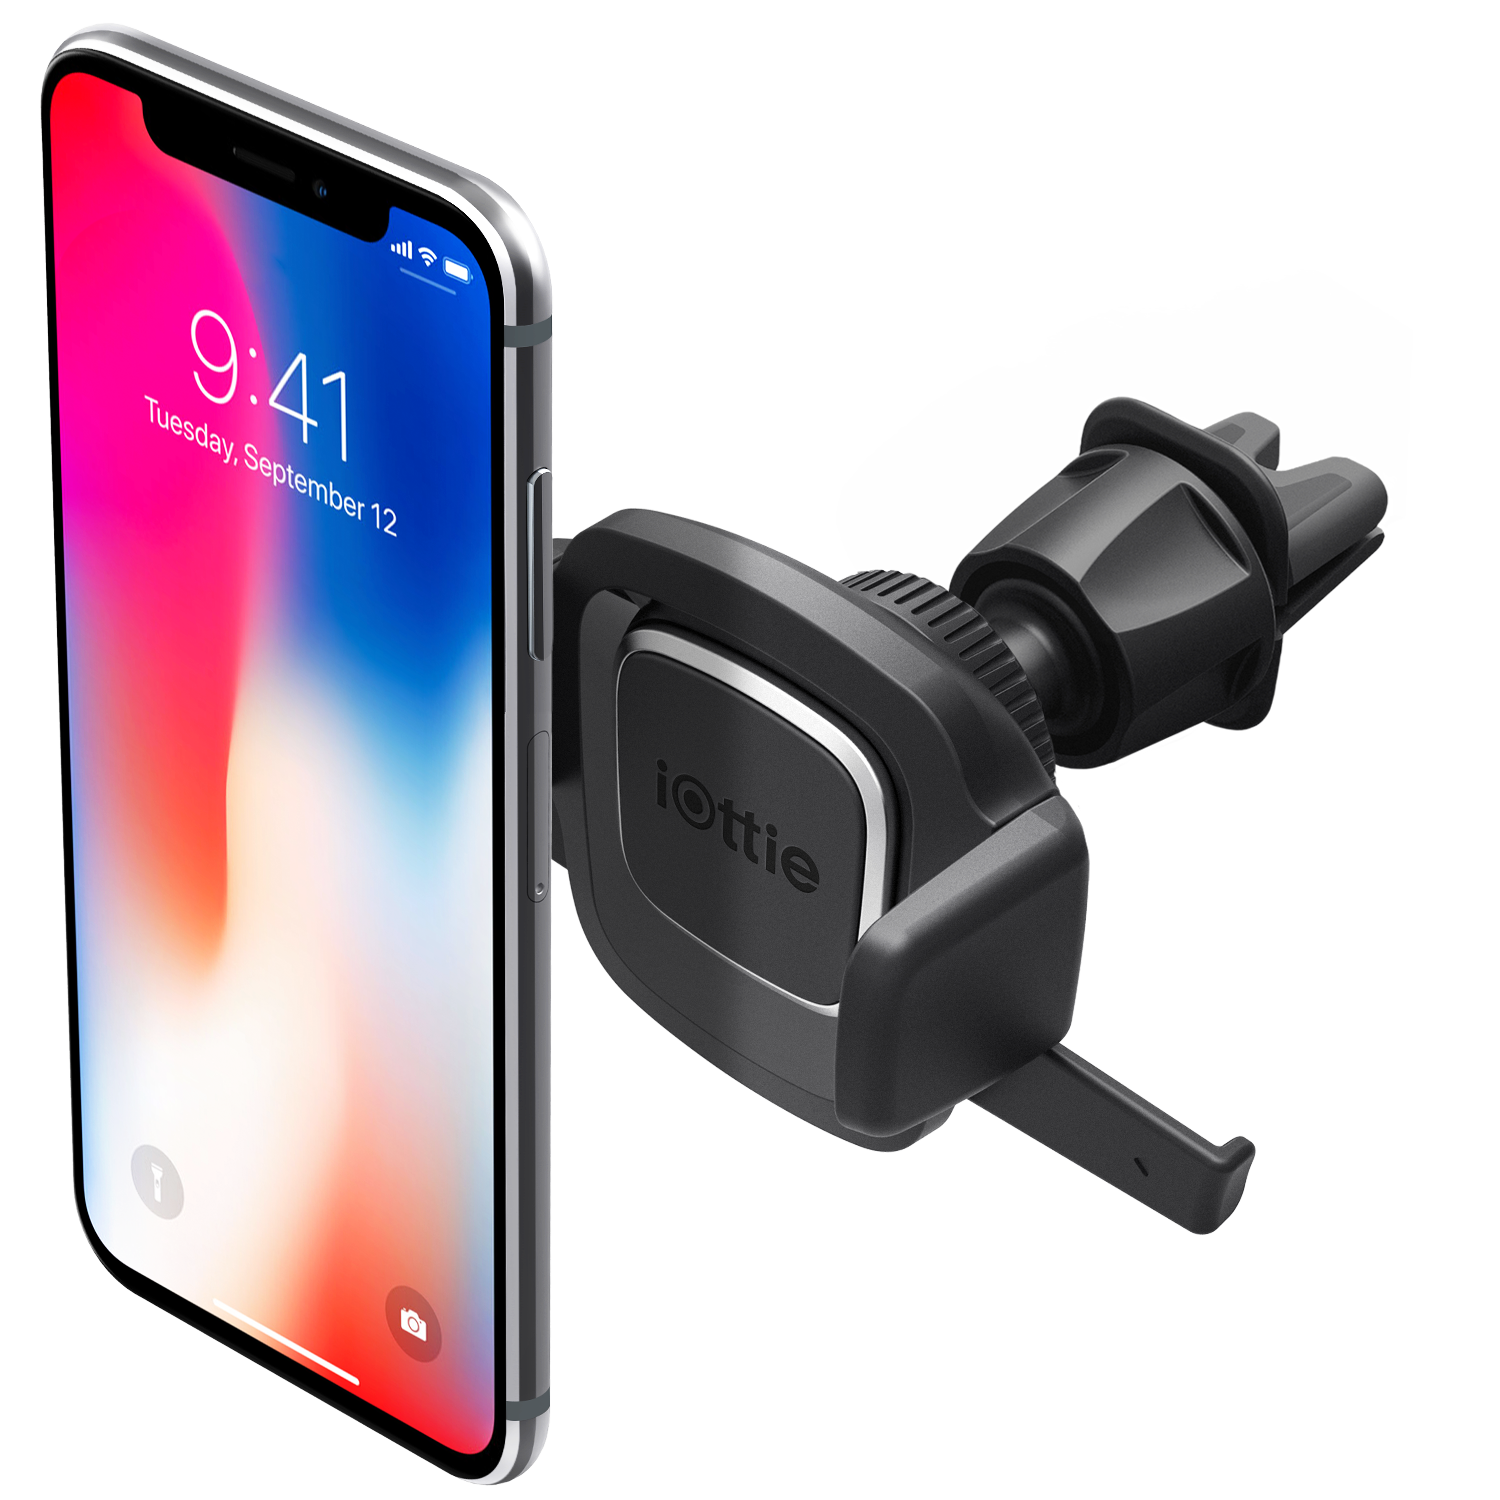 iPhone mounted on the iOttie Easy One Touch 4 Air Vent Universal Car Mount Phone Holder for iPhone, Samsung, Moto, Huawei, Nokia, LG, Google Smartphones